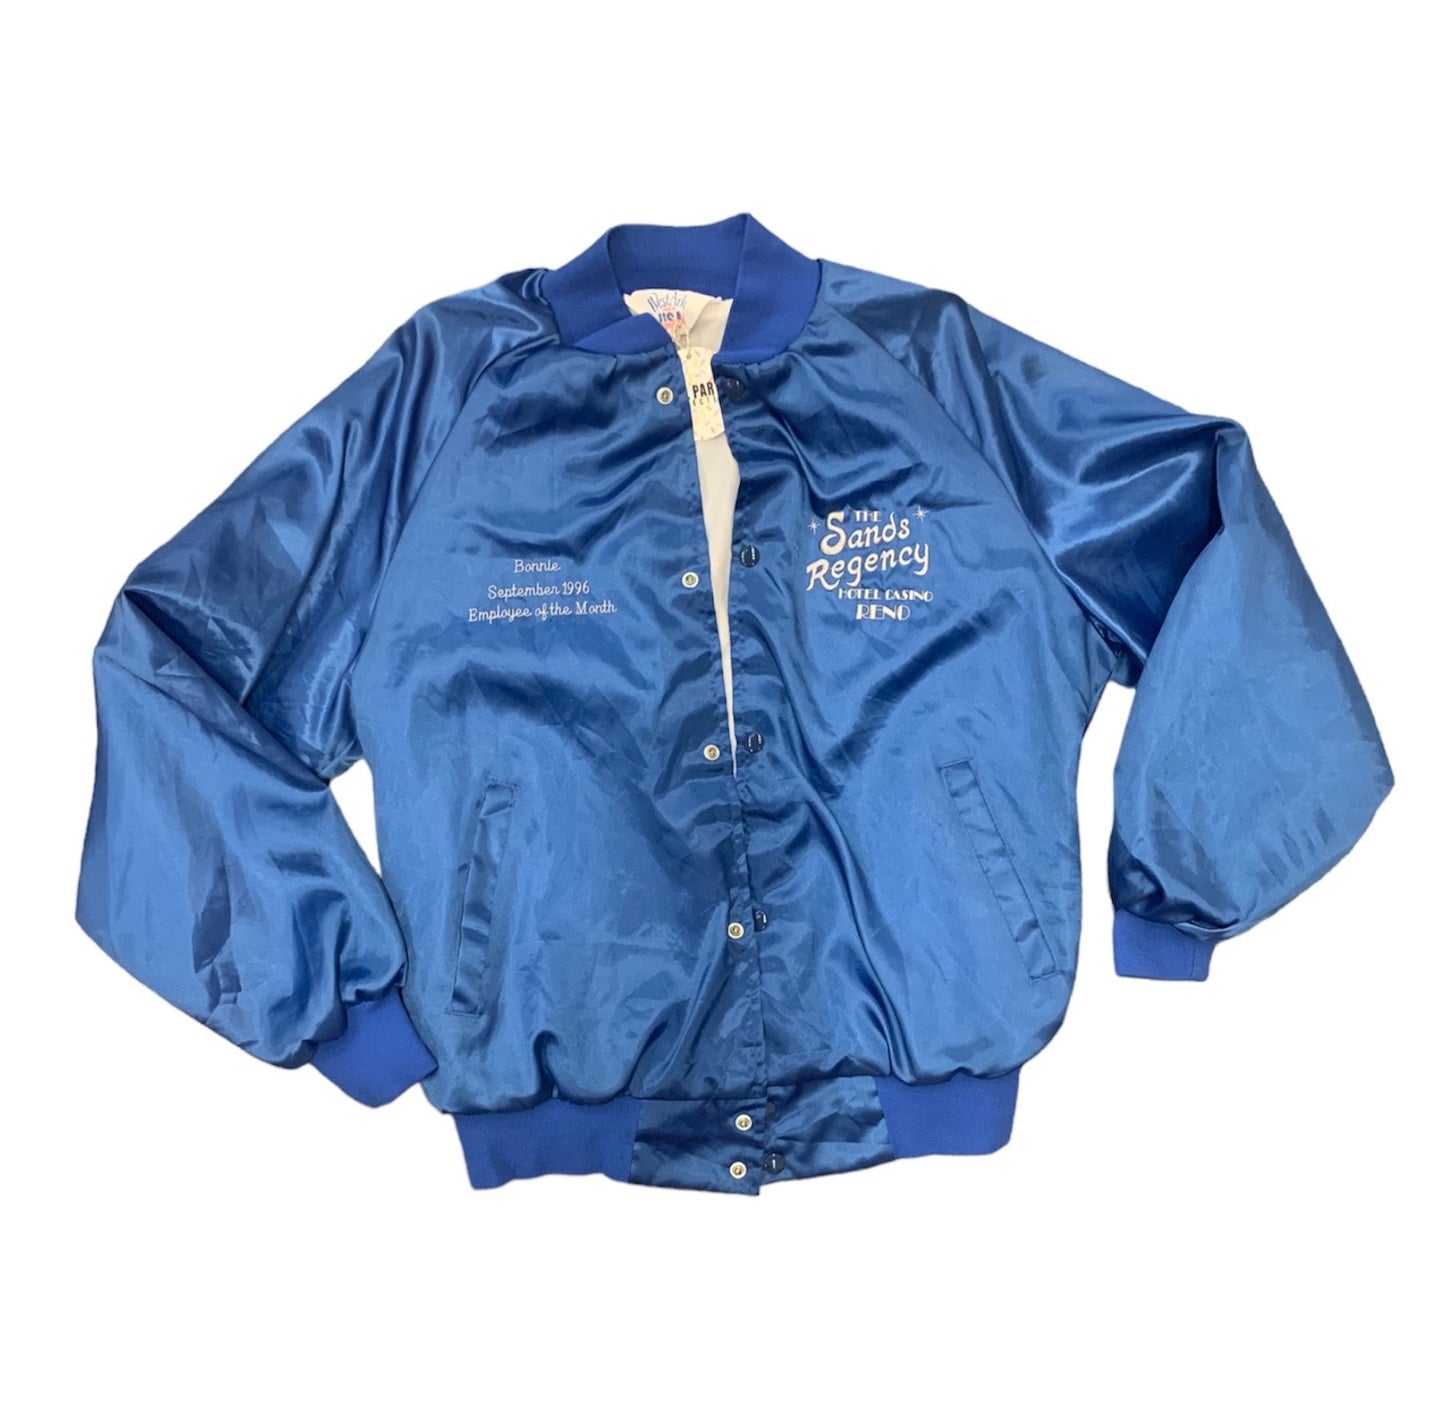 Employee of the month sands resort jacket